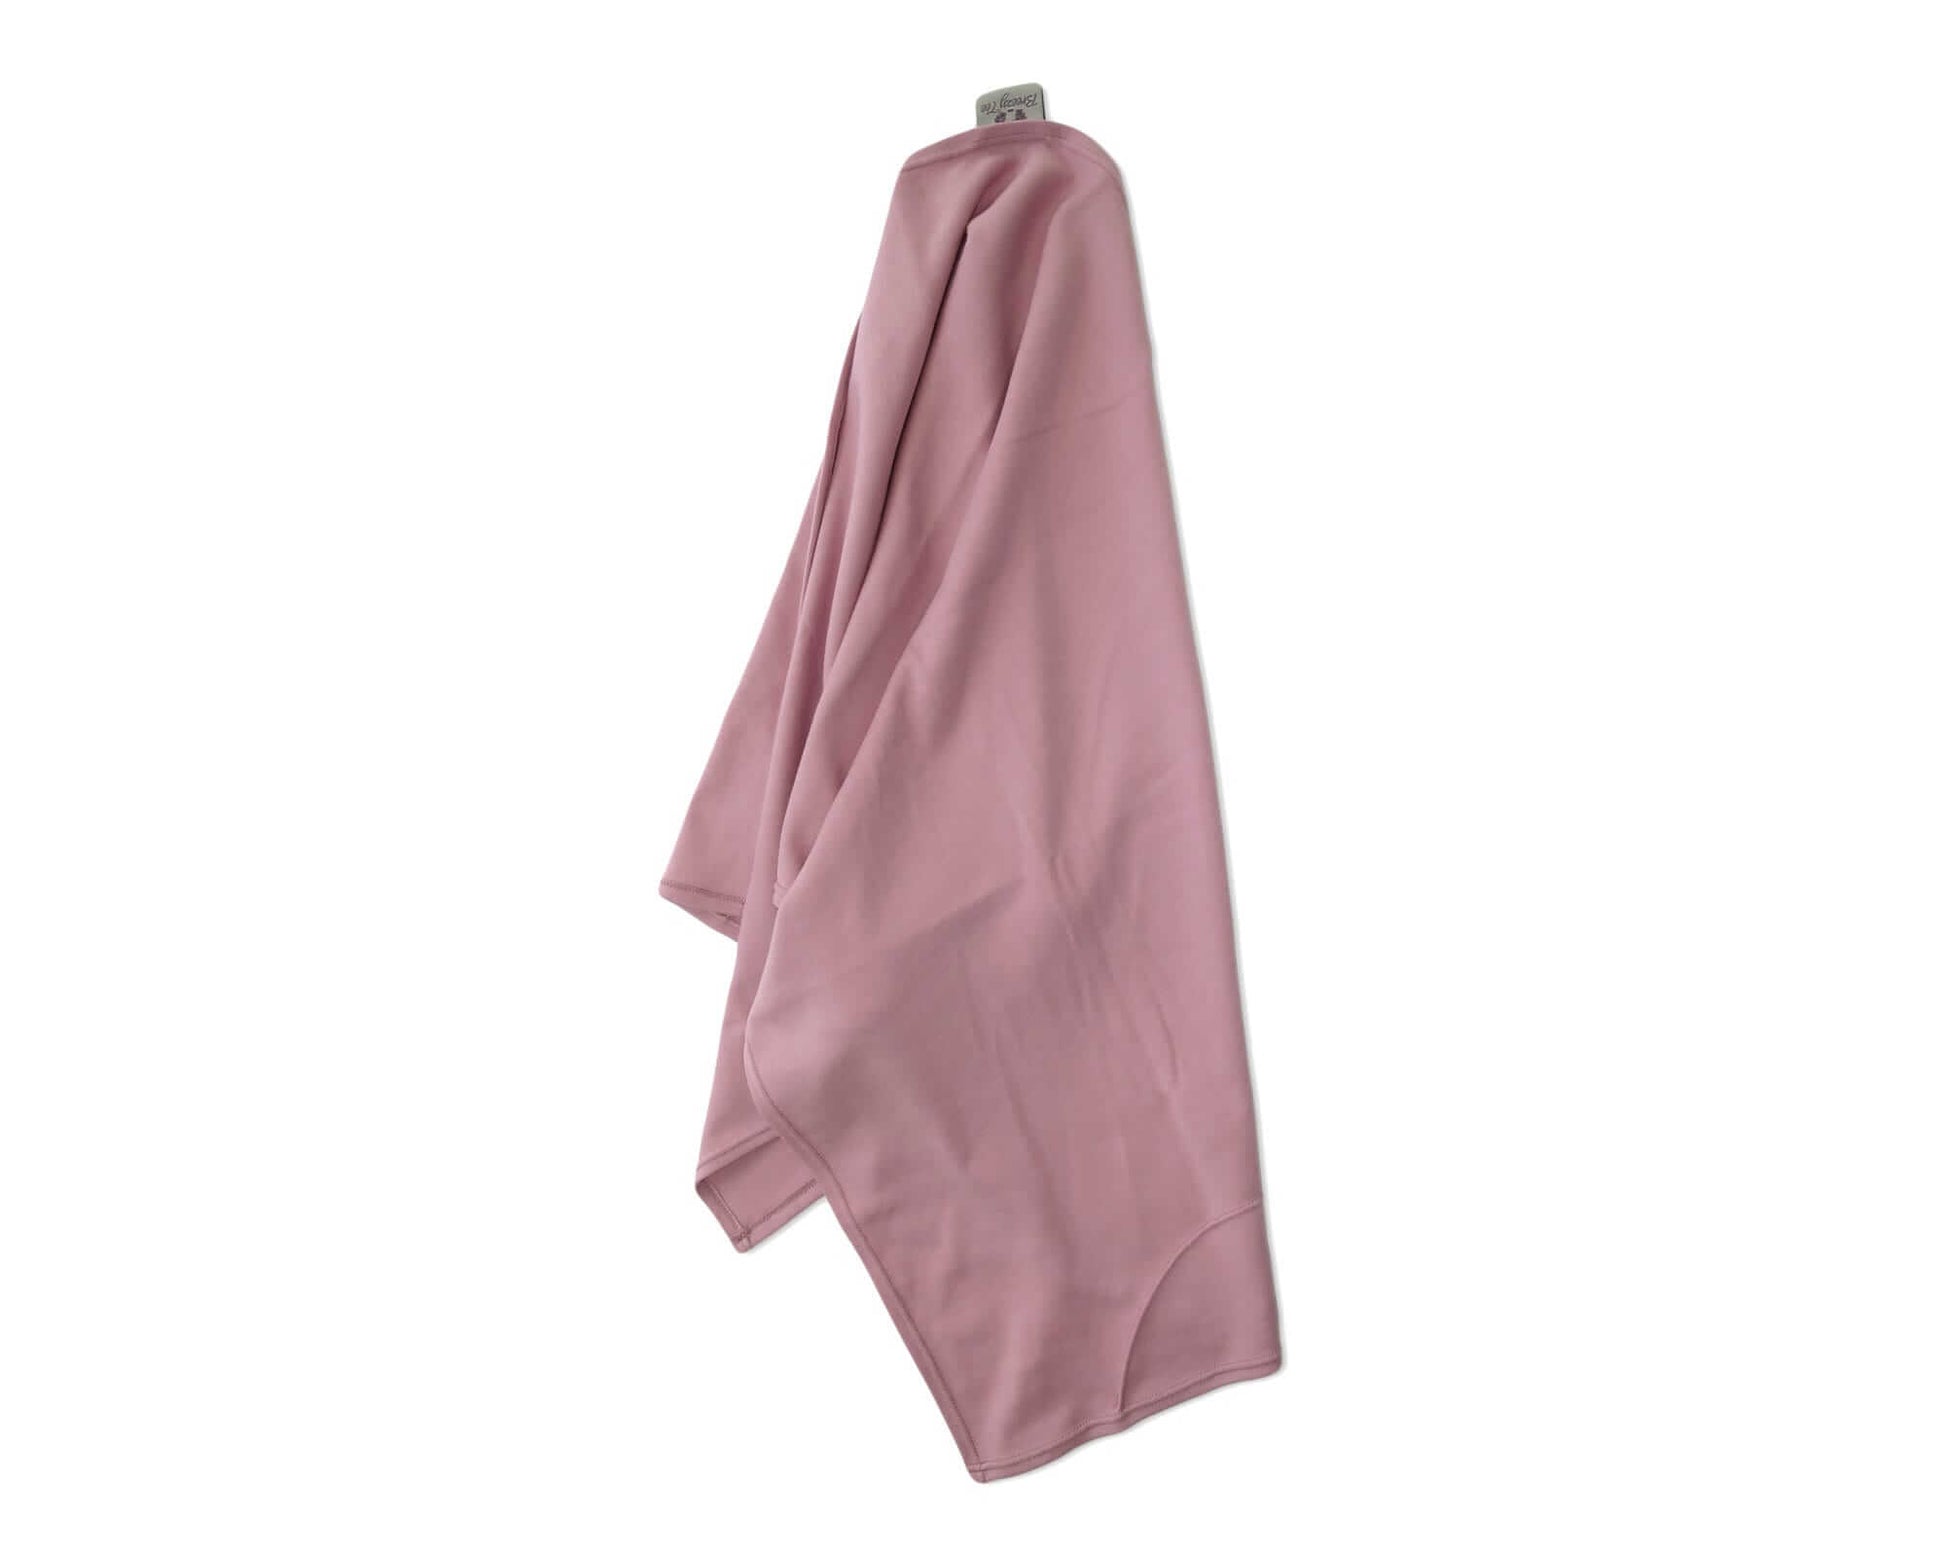 Dusty Rose T-Shirt Hair Towel for Curly, Wavy, and Straight Hair - Soft, Absorbent, and Eco-Friendly